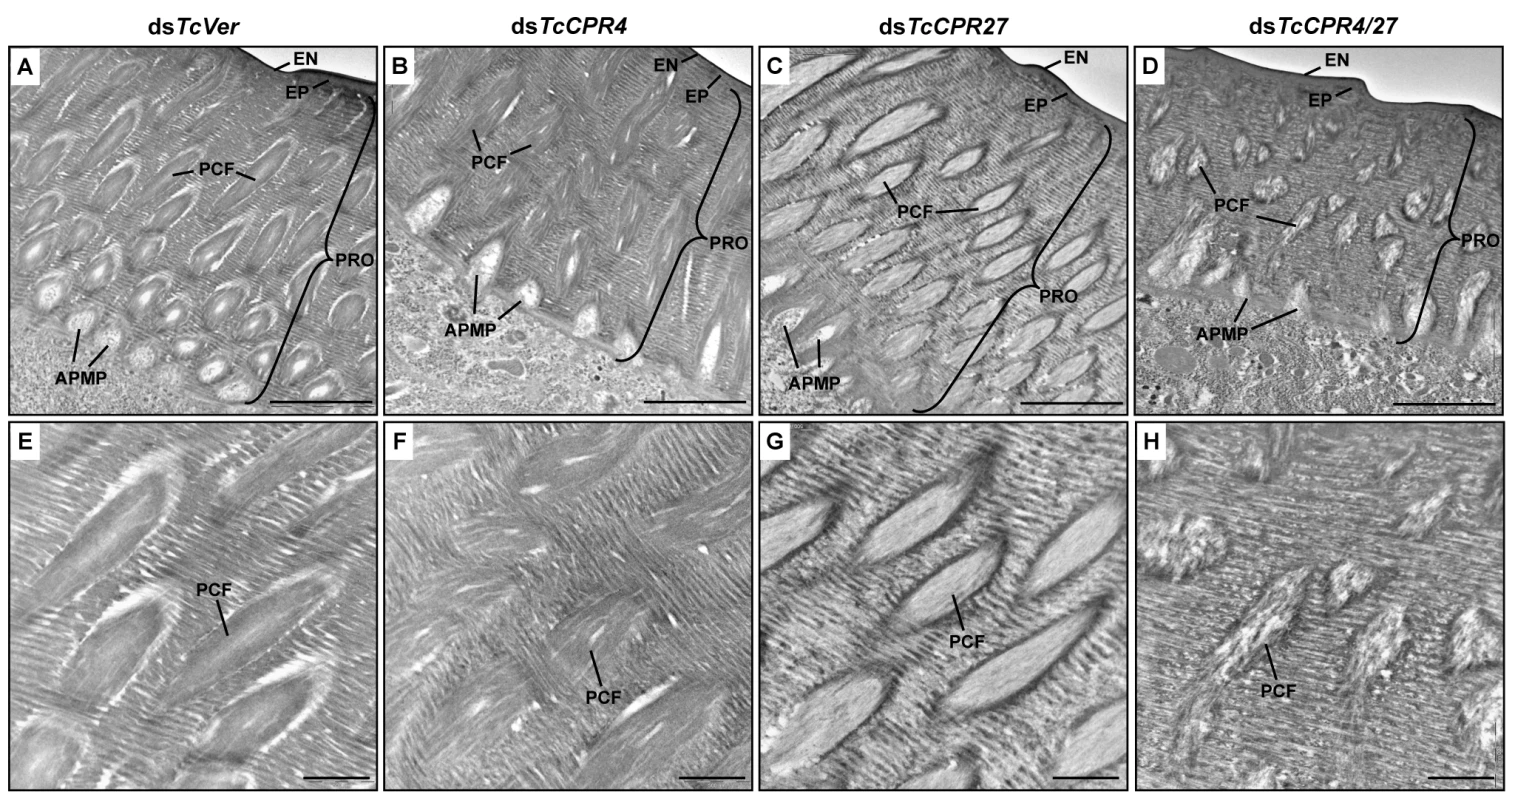 Ultrastructure of elytral cuticle of TcCPR4-, TcCPR27- and TcCPR4/27-deficient pharate adults.